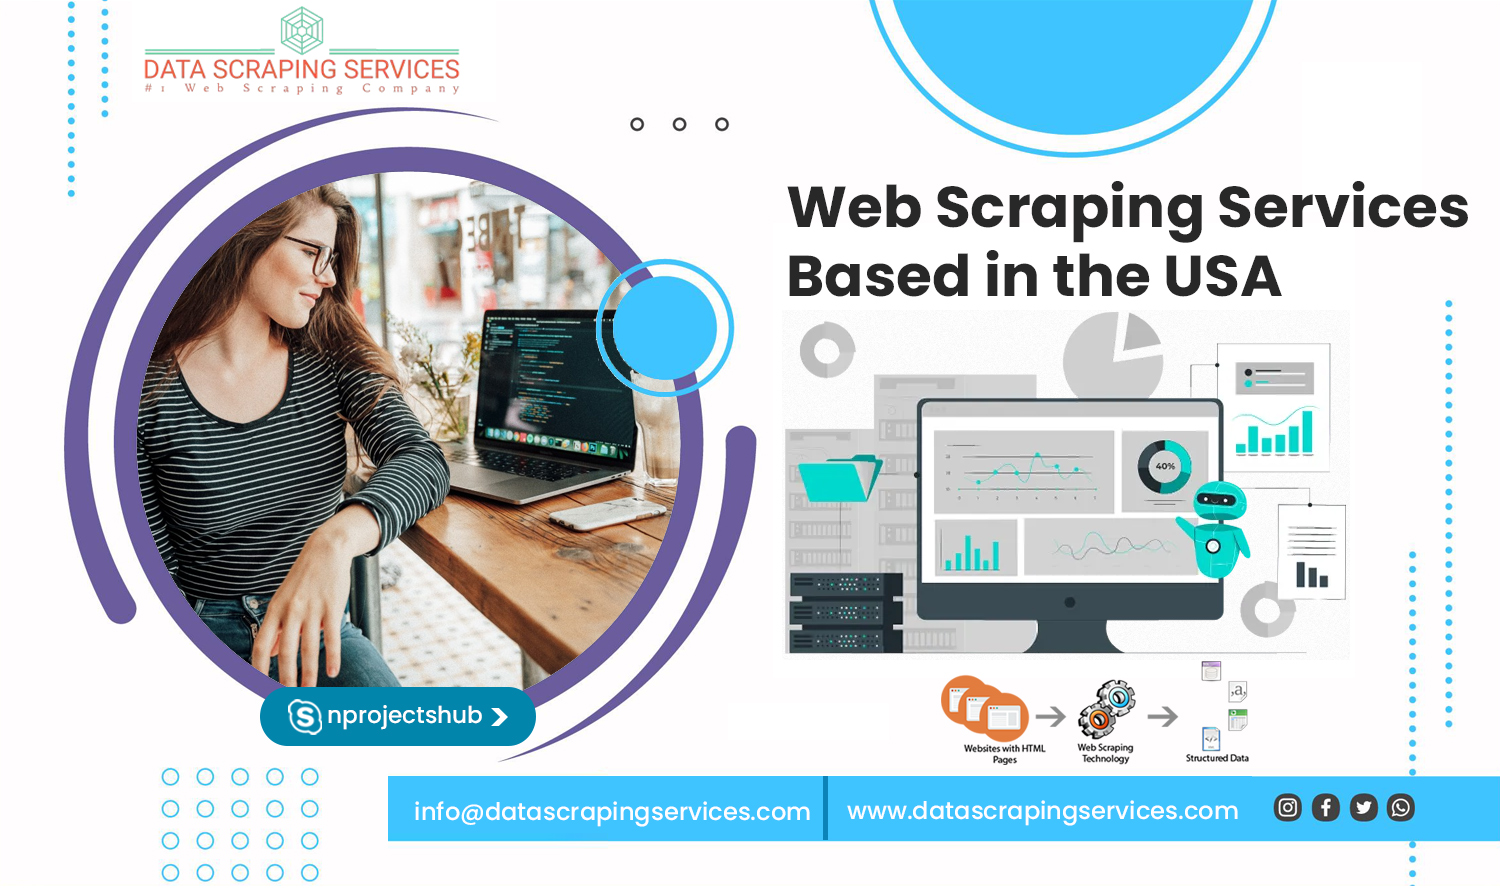 Web Scraping Services based in the USA